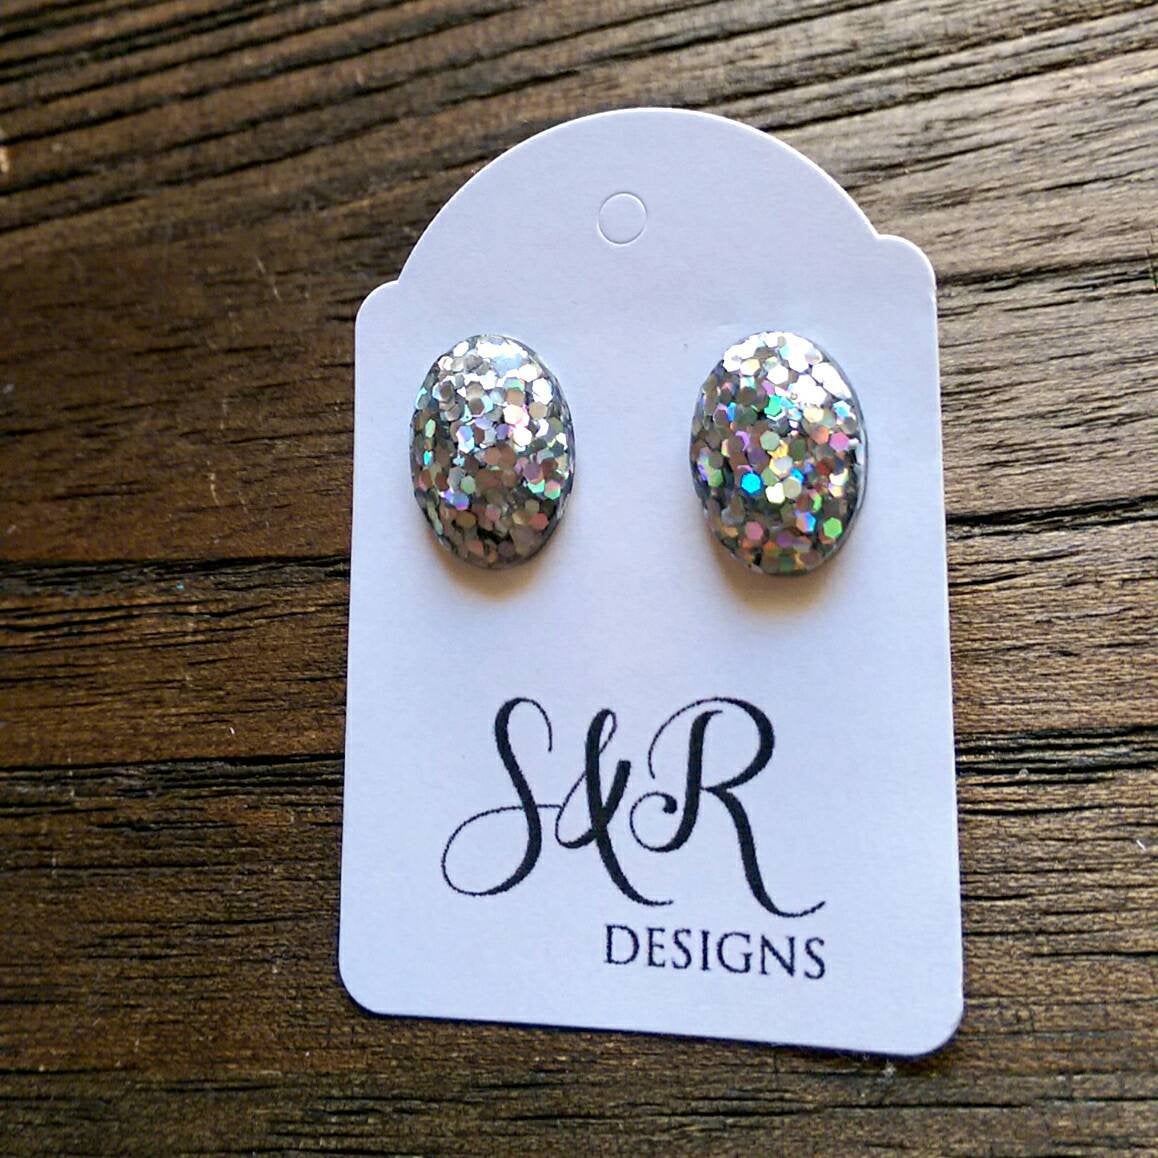 Oval Resin Stud Earrings, Holographic Silver Glitter Earrings, Stainless Steel Stud Earrings.